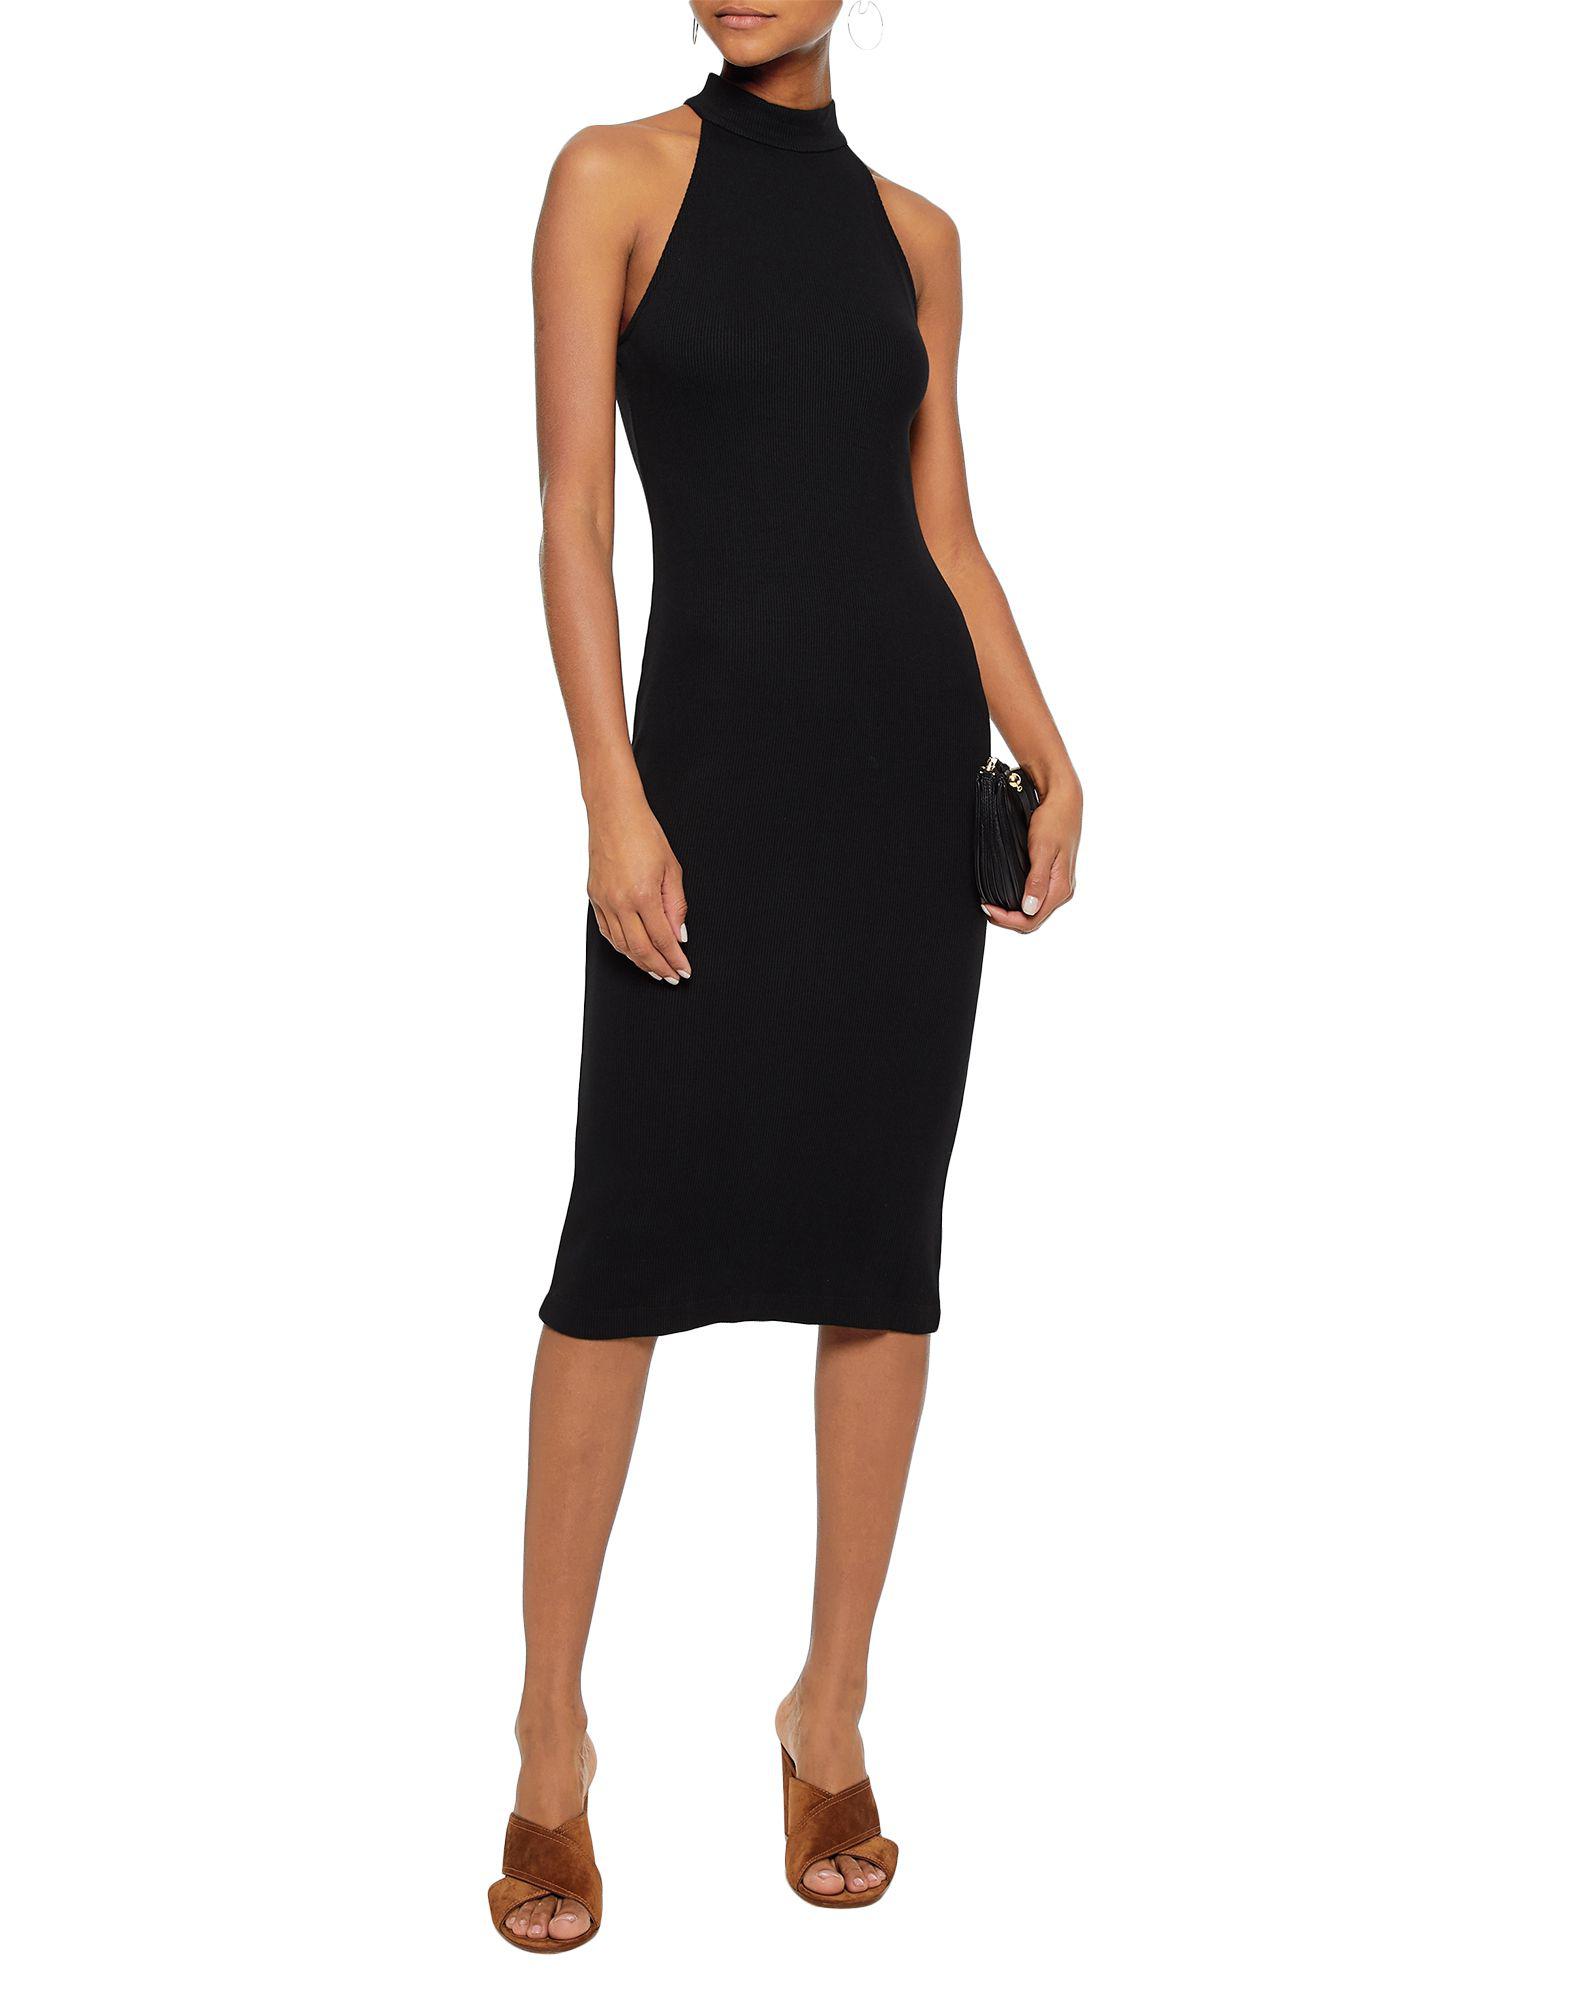 L'Agence Synthetic 3/4 Length Dress in Black - Lyst